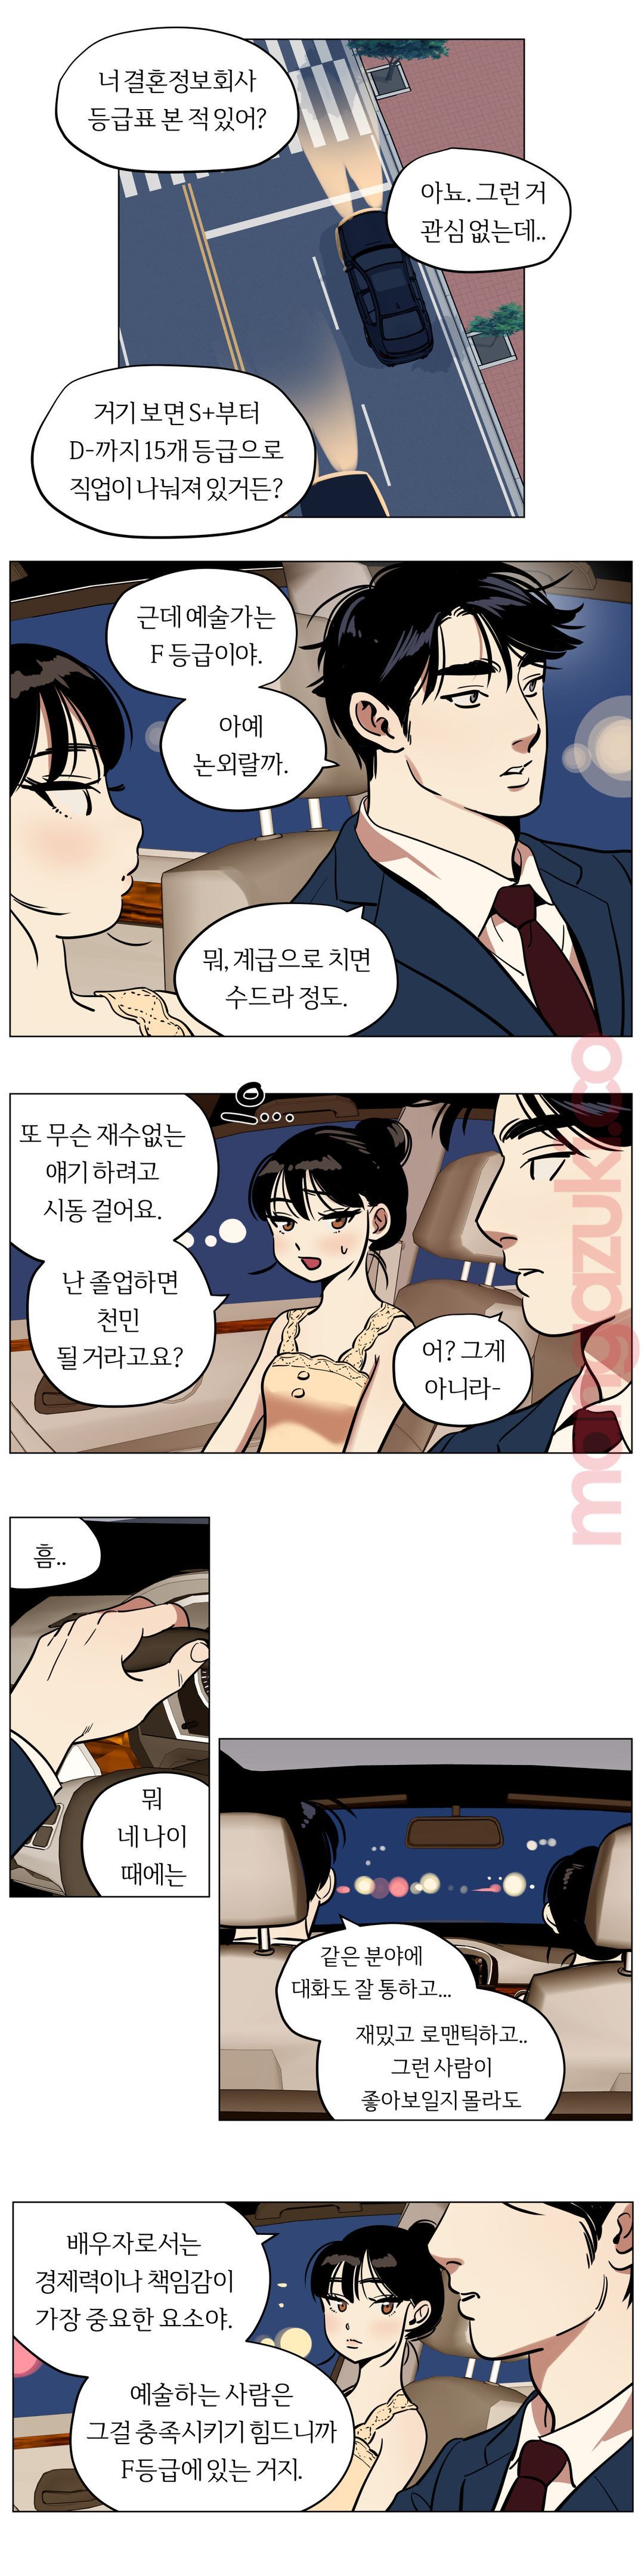 Snowman Raw - Chapter 20 Page 6